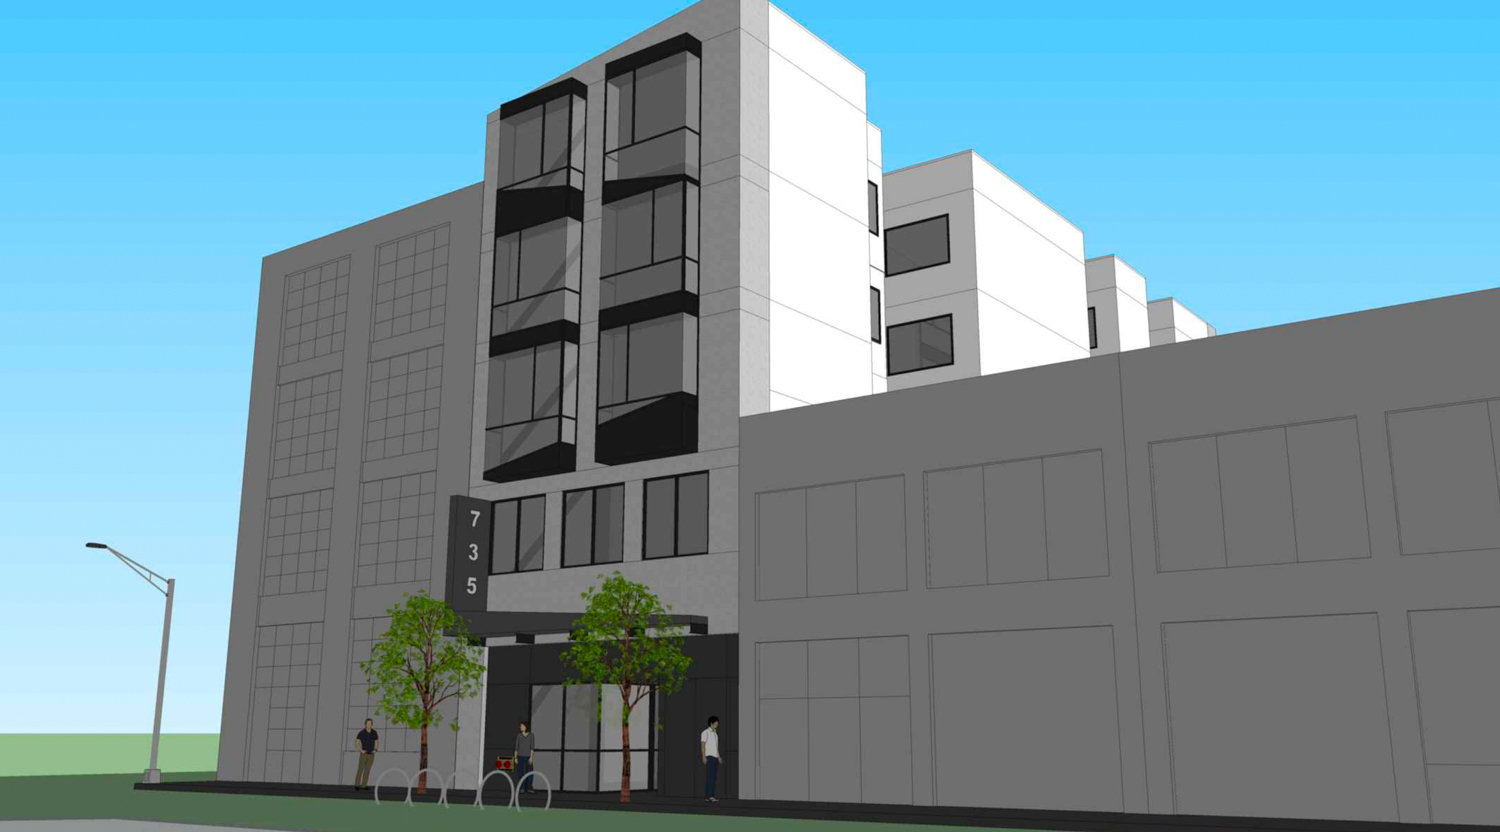 739 Bryant Street facade, rendering by Martinkovic Milford Architects